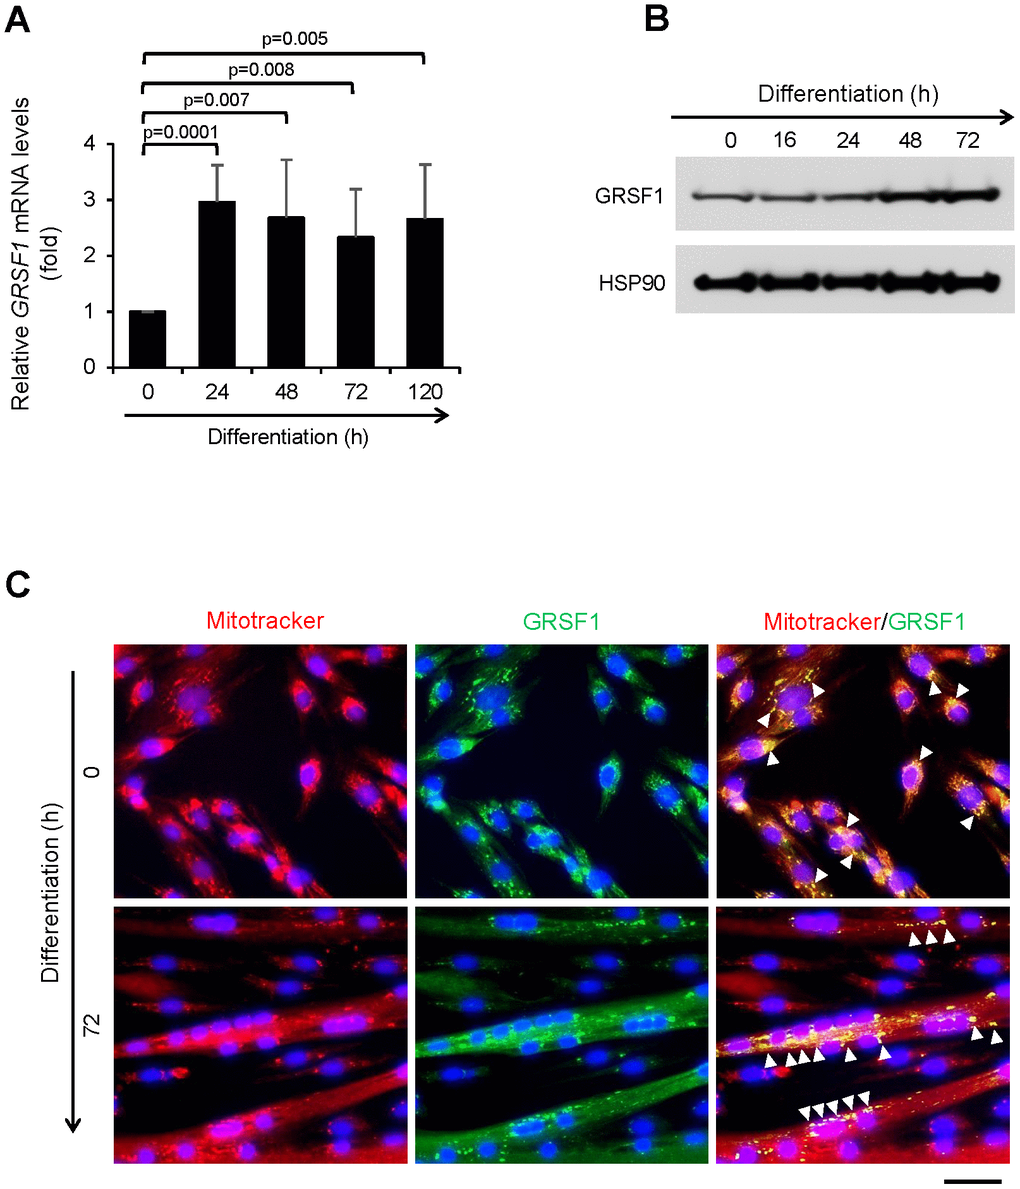 Expression of GRSF1 across myogenesis. (A) RT-qPCR analysis of GRSF1 mRNA levels in proliferating (0 h) and differentiating (24-120 h) human myoblasts; n=3. GRSF1 mRNA levels were normalized to the levels of GAPDH mRNA. (B) Western blot analysis of the levels of GRSF1 at the indicated times during differentiation; n=2. (C) Immunofluorescence detection of GRSF1 (green) and mitochondria (red) in proliferating myoblasts and differentiating myotubes. Arrowheads indicate GRSF1 signals; n=3. Scale bar, 50 μm.